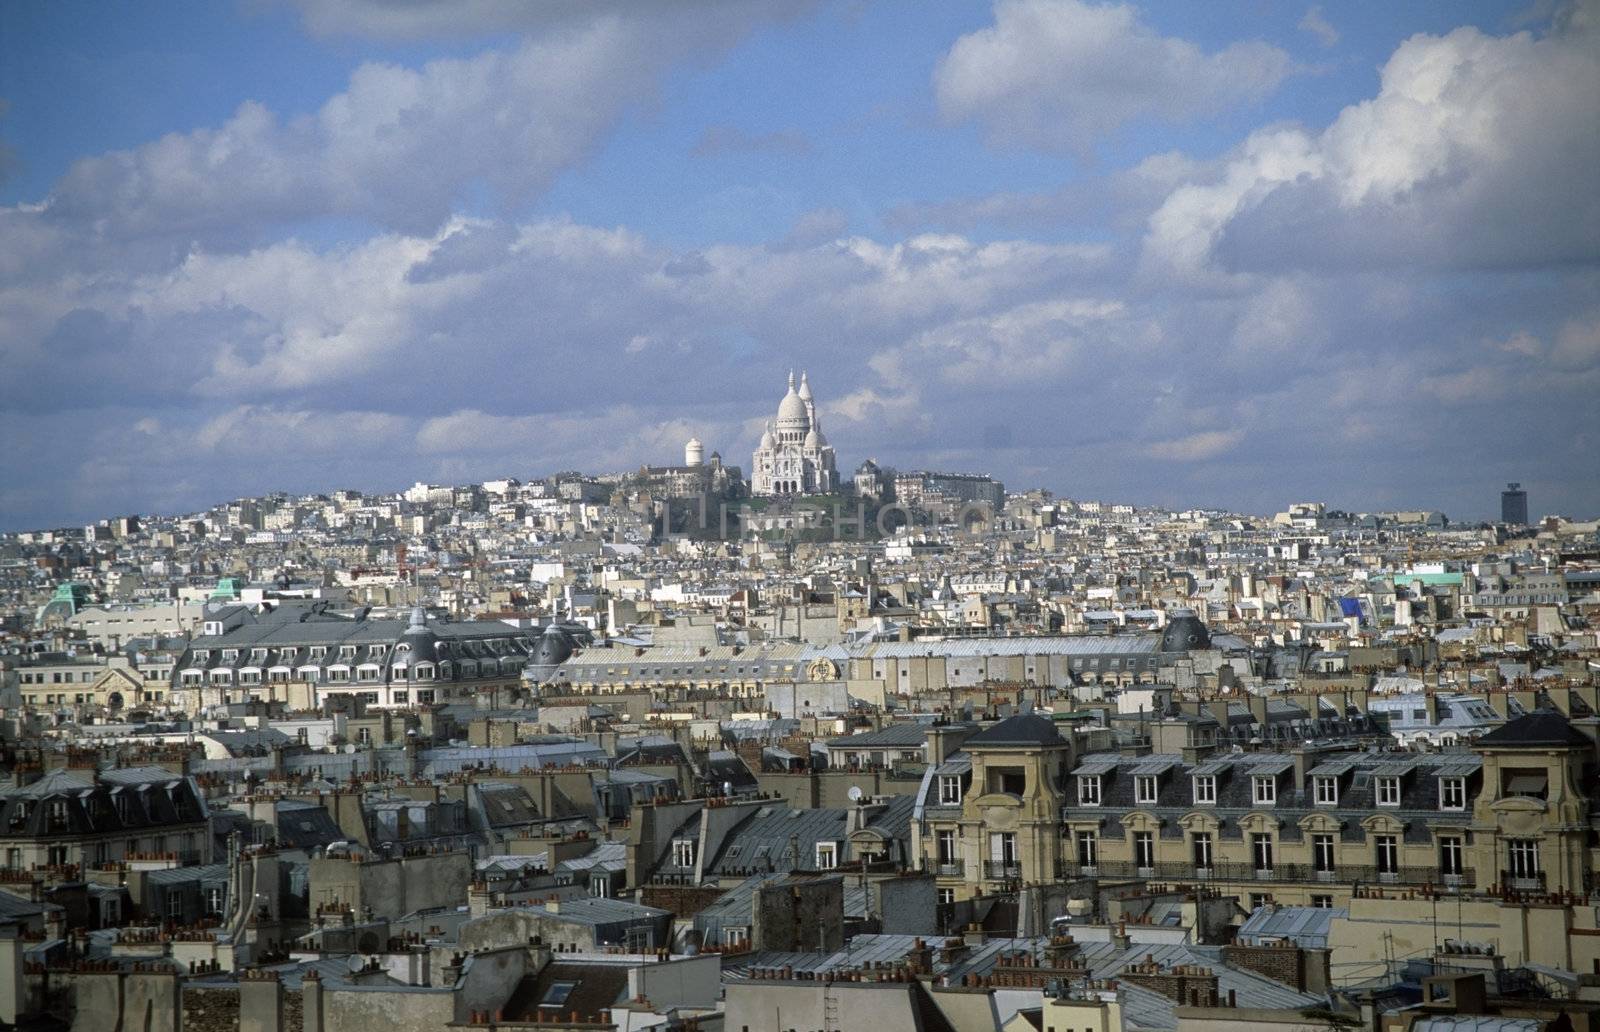 A view of the Sacre Coeur above the Parisian skyline.